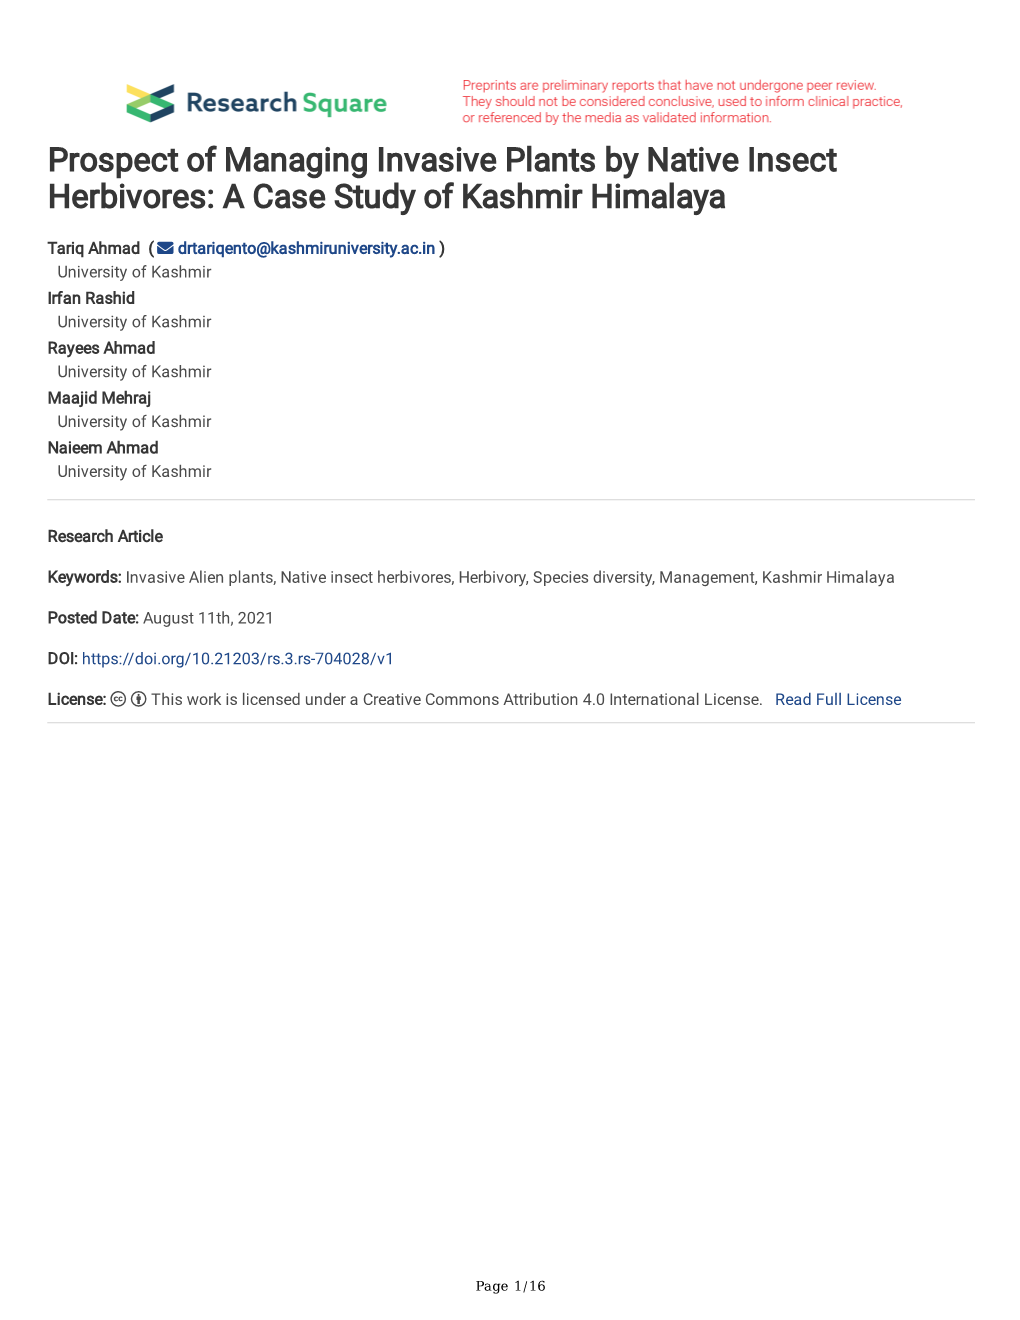 Prospect of Managing Invasive Plants by Native Insect Herbivores: a Case Study of Kashmir Himalaya